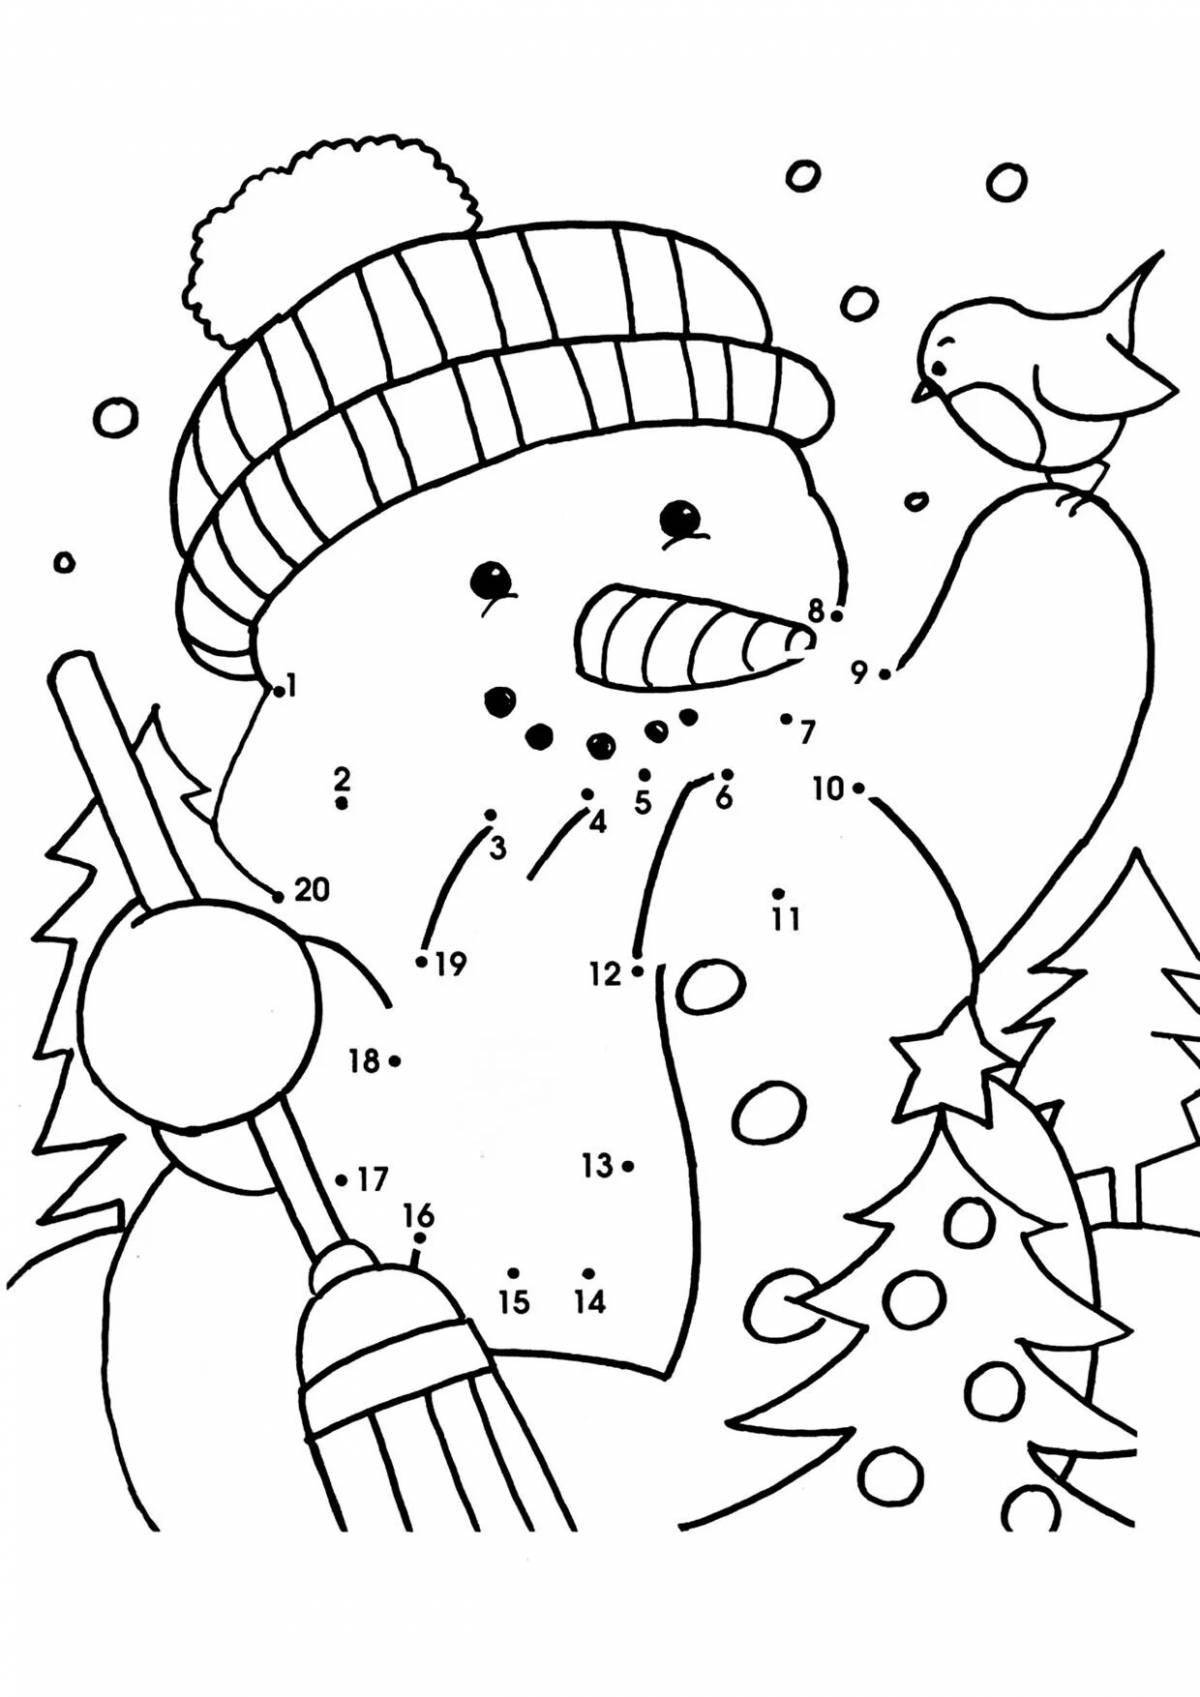 By numbers winter for kids #5